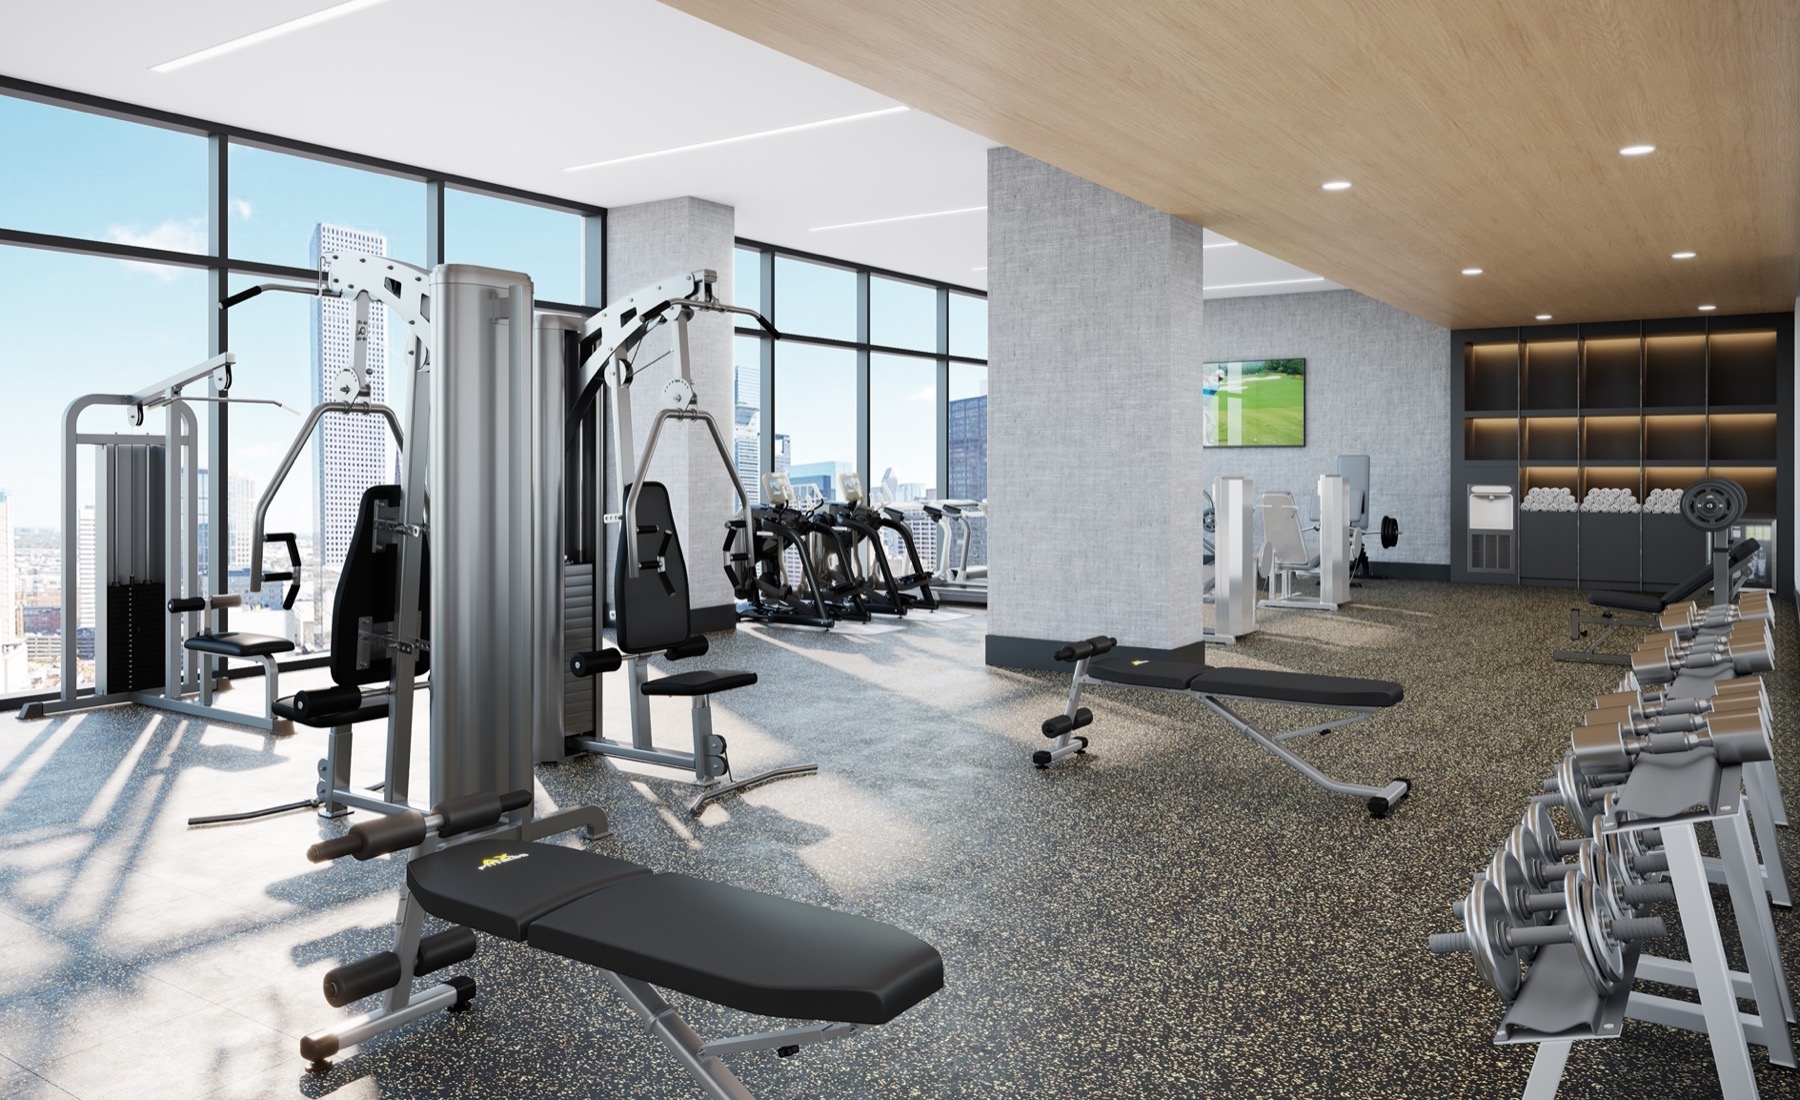 Fitness center with free weights, strength machines, cardio equipment and floor to ceiling windows with downtown views